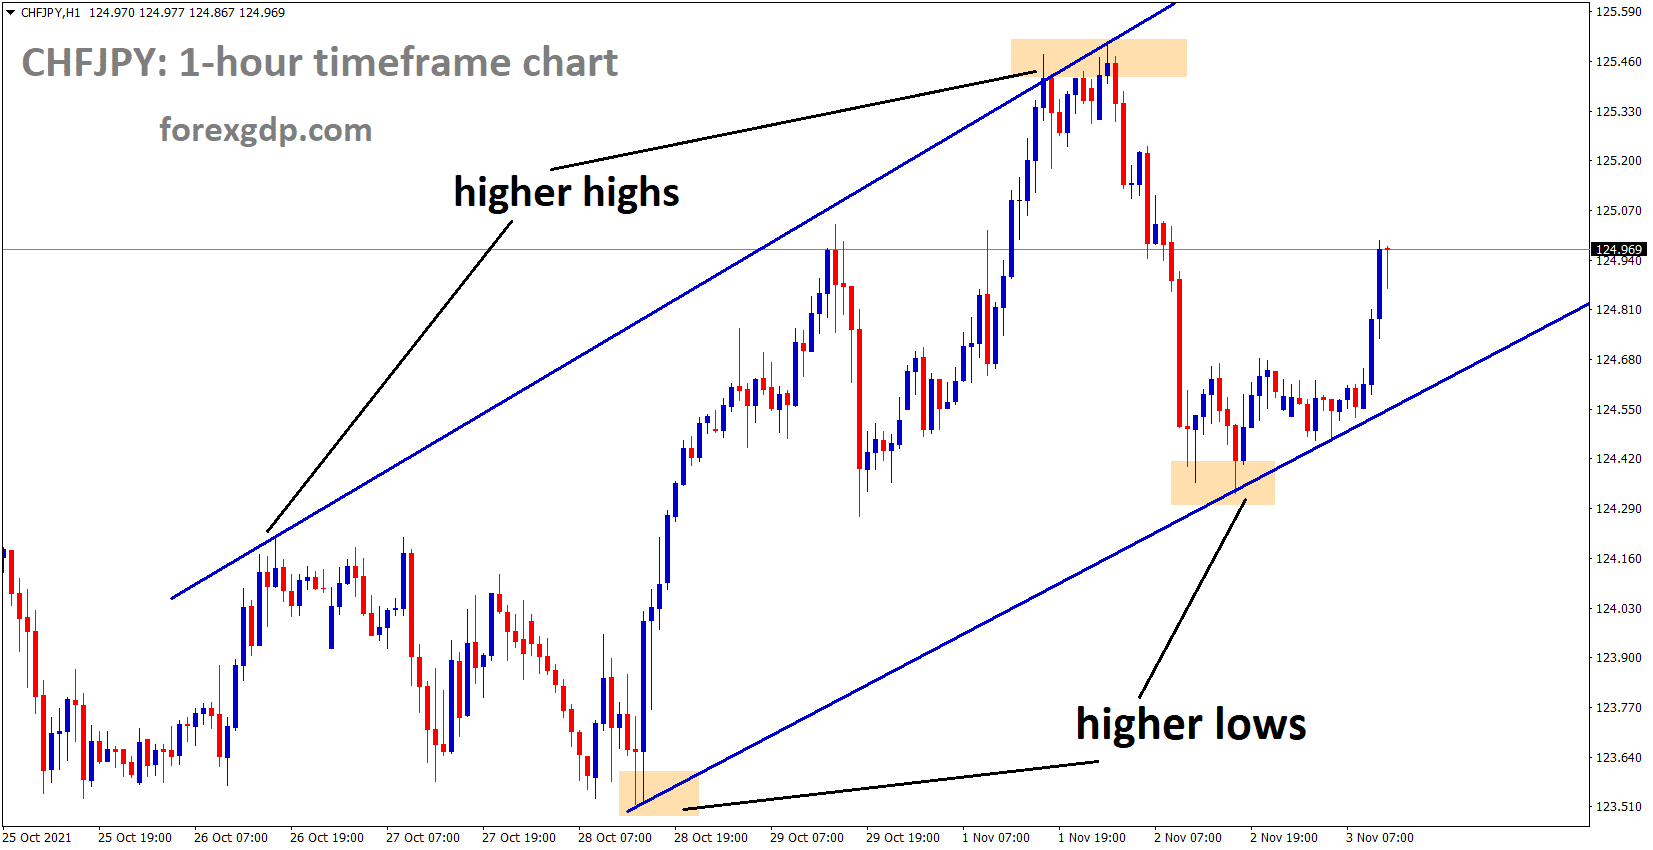 CHFJPY is moving in an Ascending channel and rebounded from a higher low area